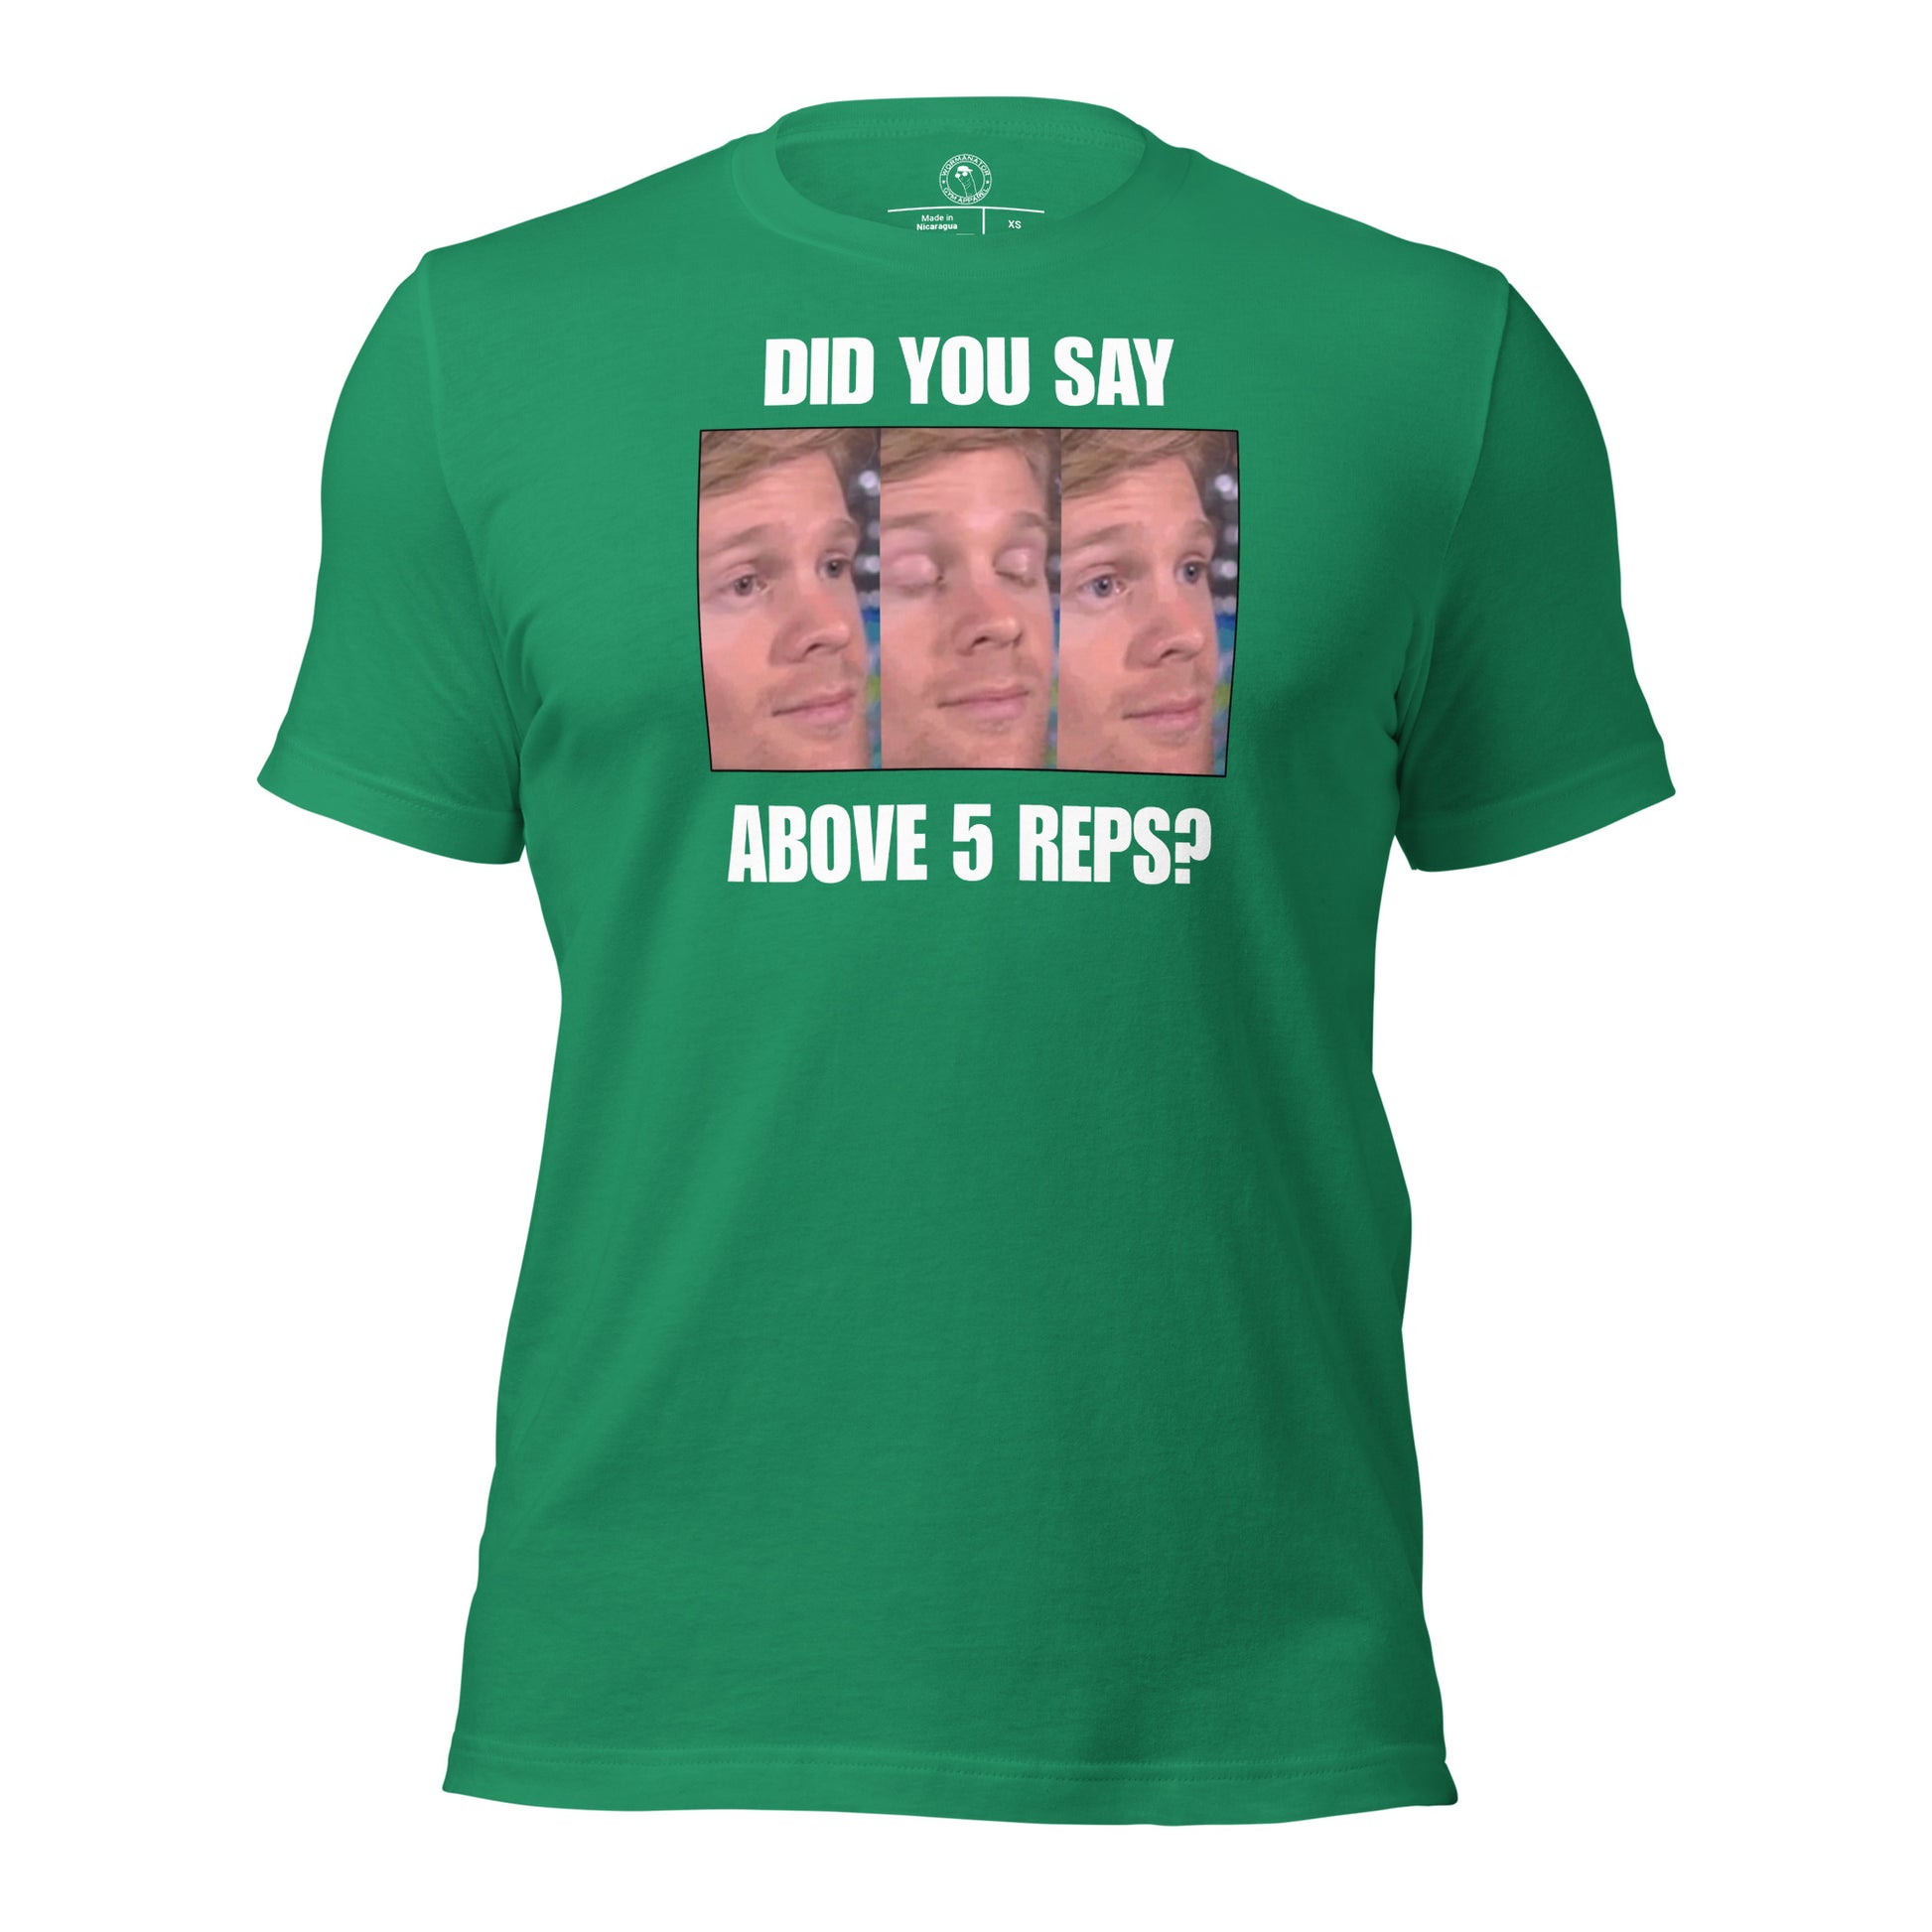 Above 5 Reps is Cardio Shirt in Kelly Green